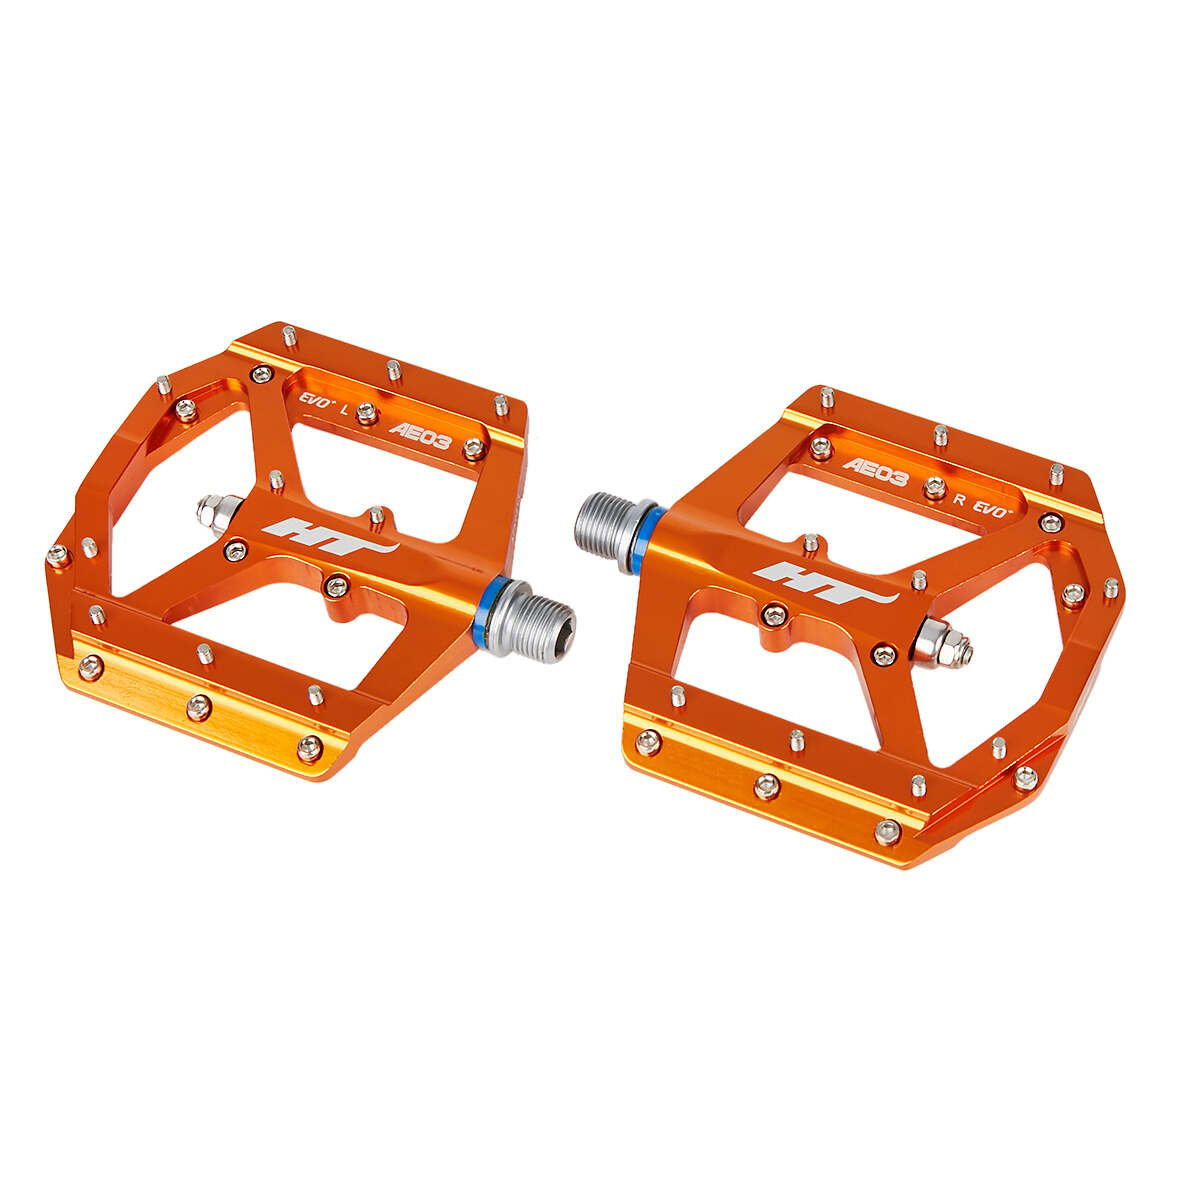 HT Components Pedals AE03 Orange